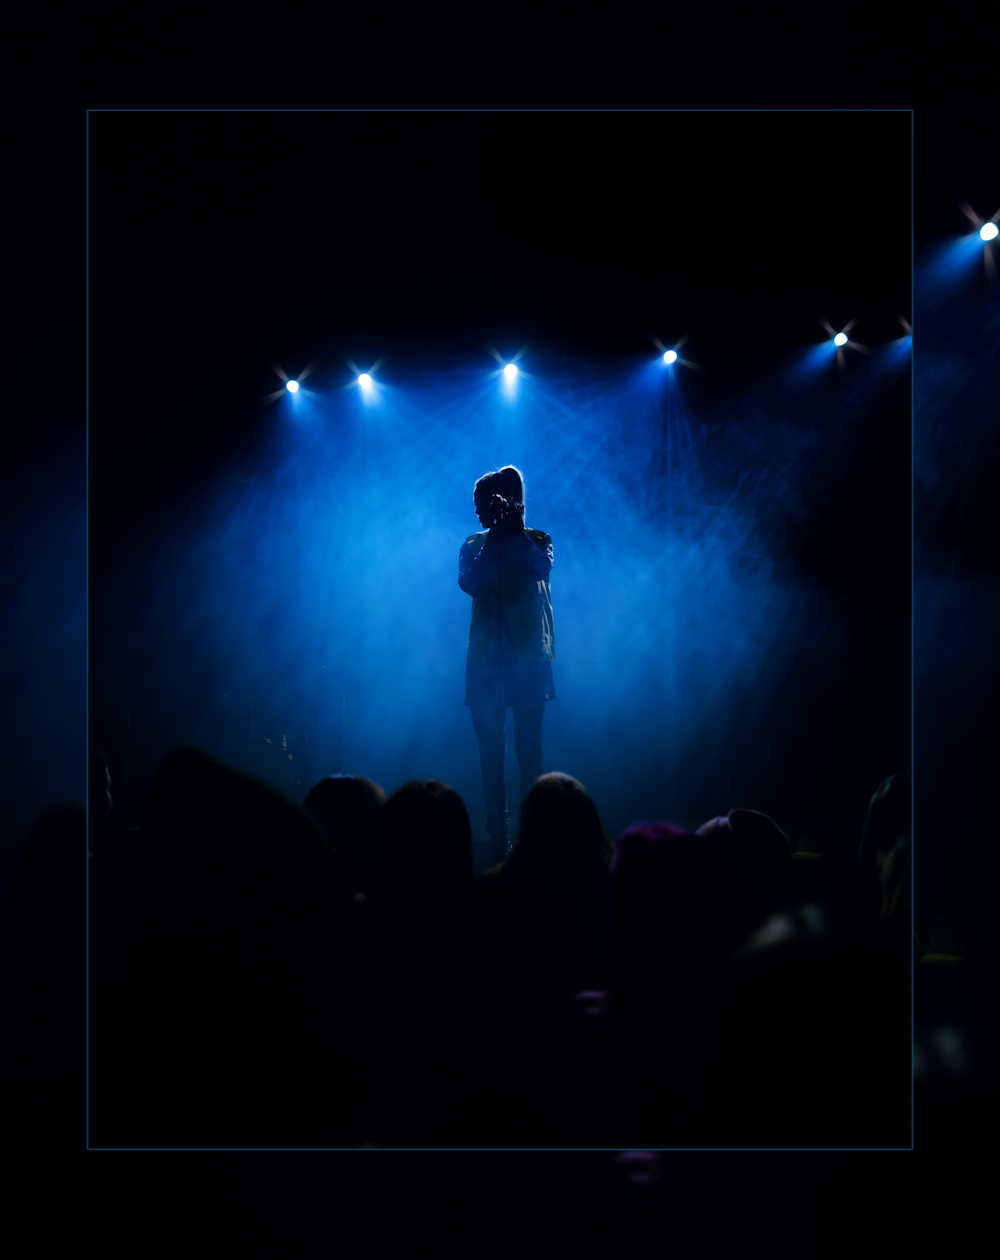 silhouette of standing person on stage